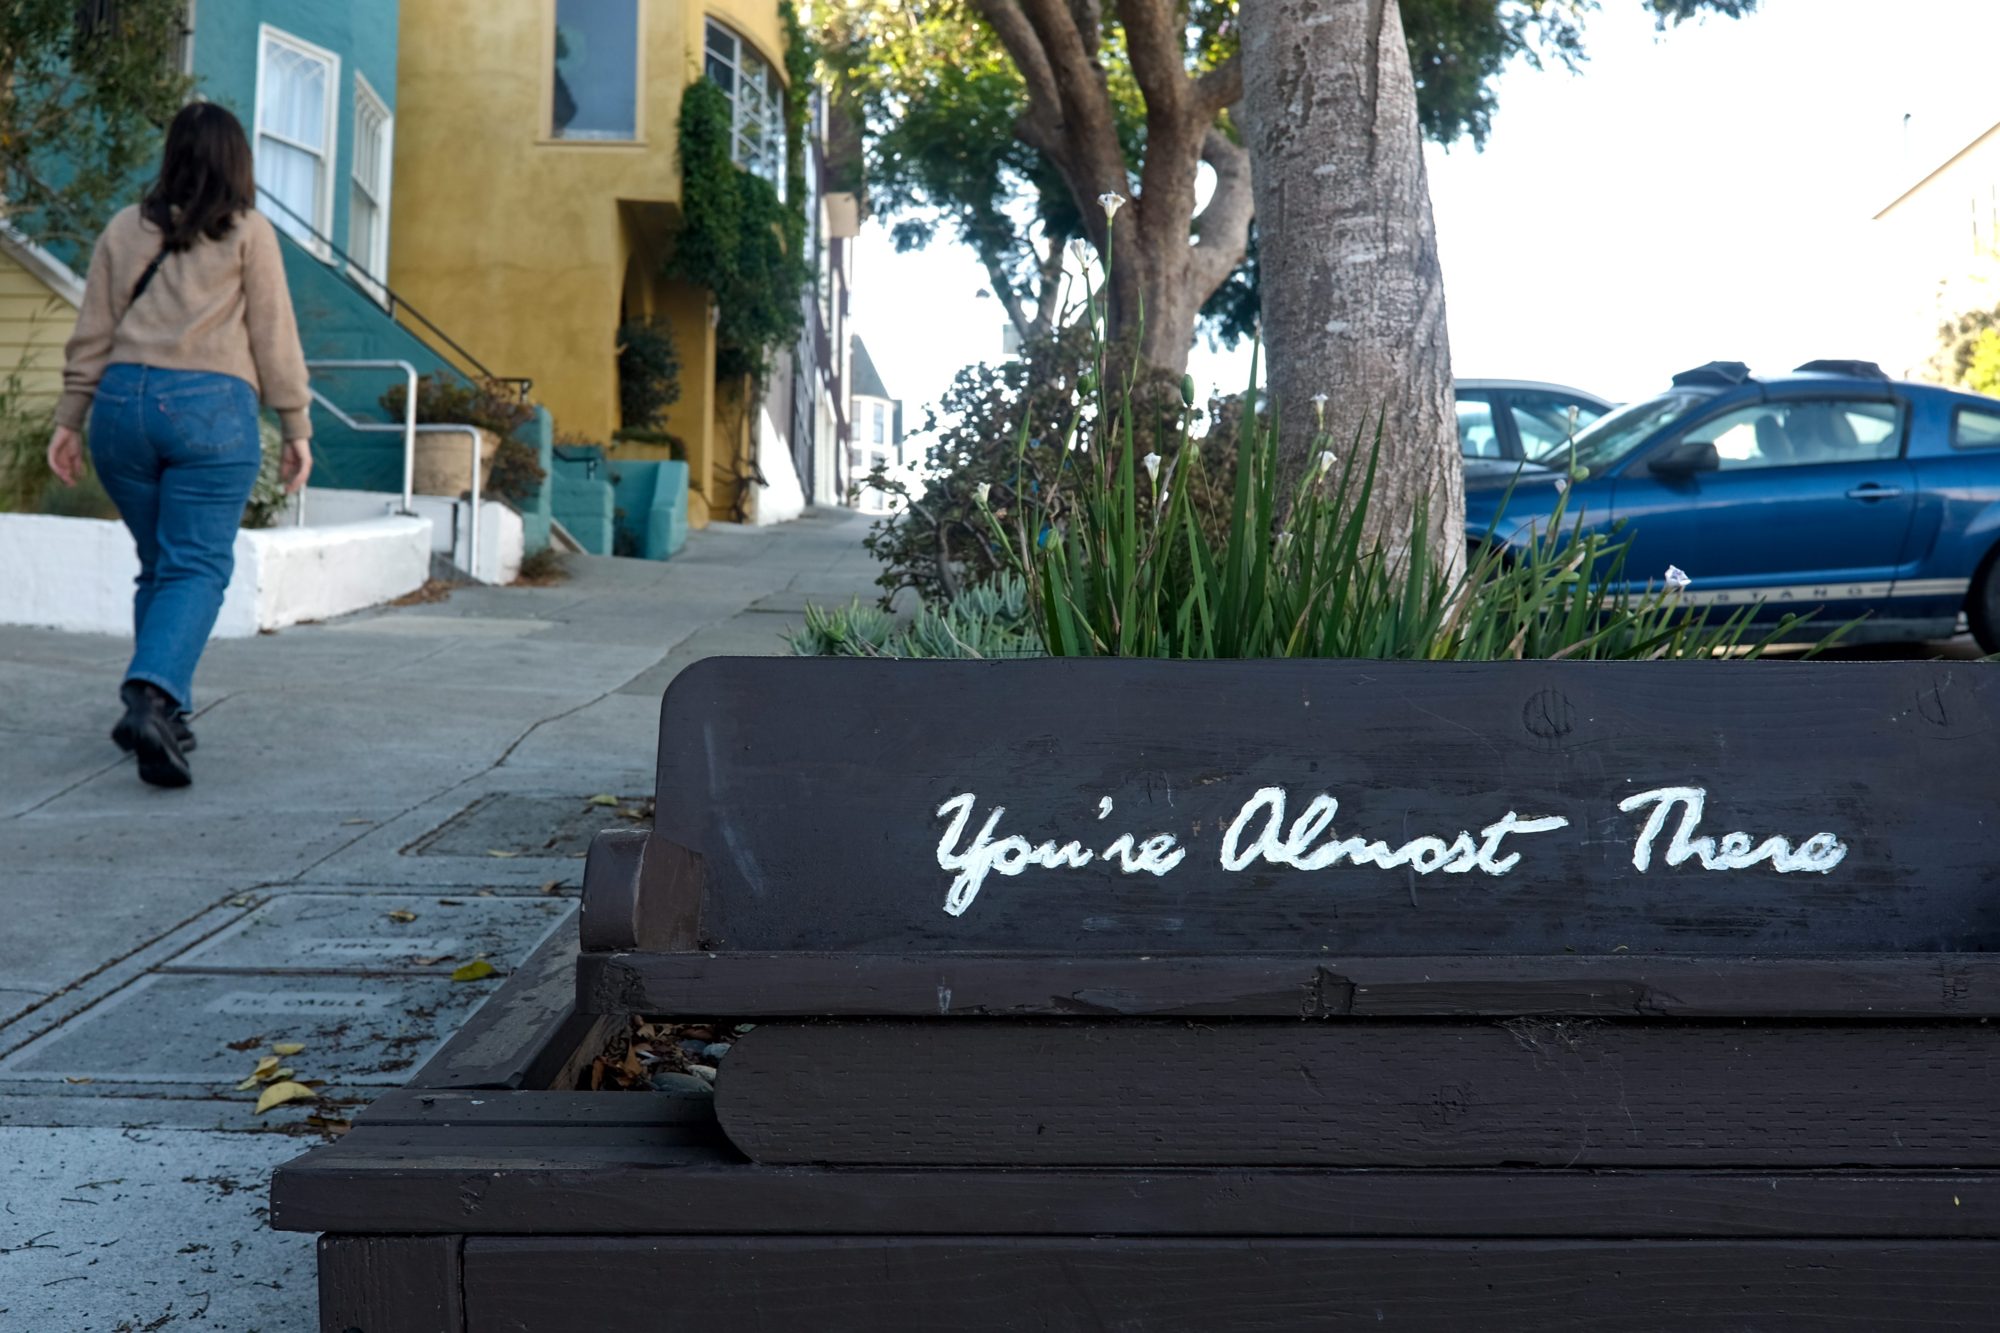 Alyssa walks up a hill in San Francisco and a bench reads "you're almost there"